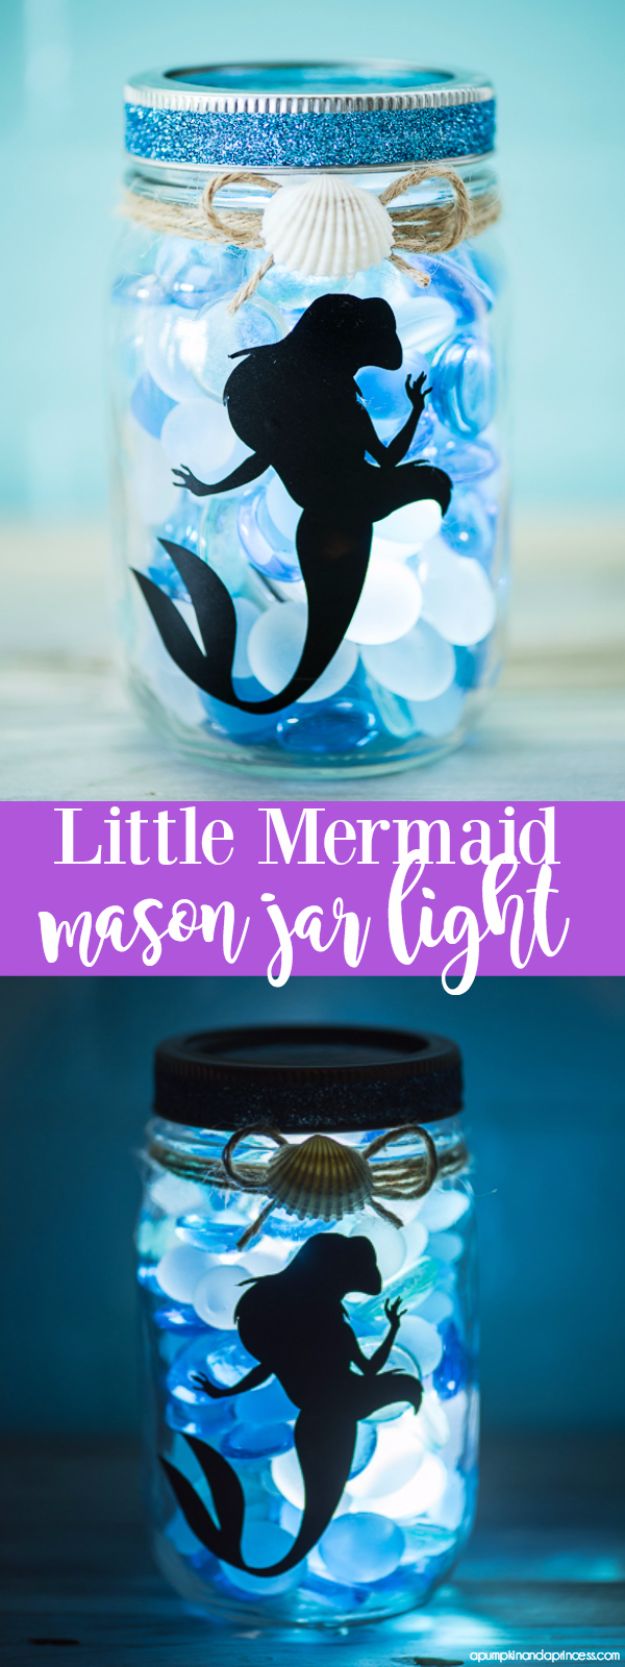 DIY Mermaid Crafts - DIY Little Mermaid Mason Jar Light - How To Make Room Decorations, Art Projects, Jewelry, and Makeup For Kids, Teens and Teenagers - Mermaid Costume Tutorials - Fun Clothes, Pillow Projects, Mermaid Tail Tutorial